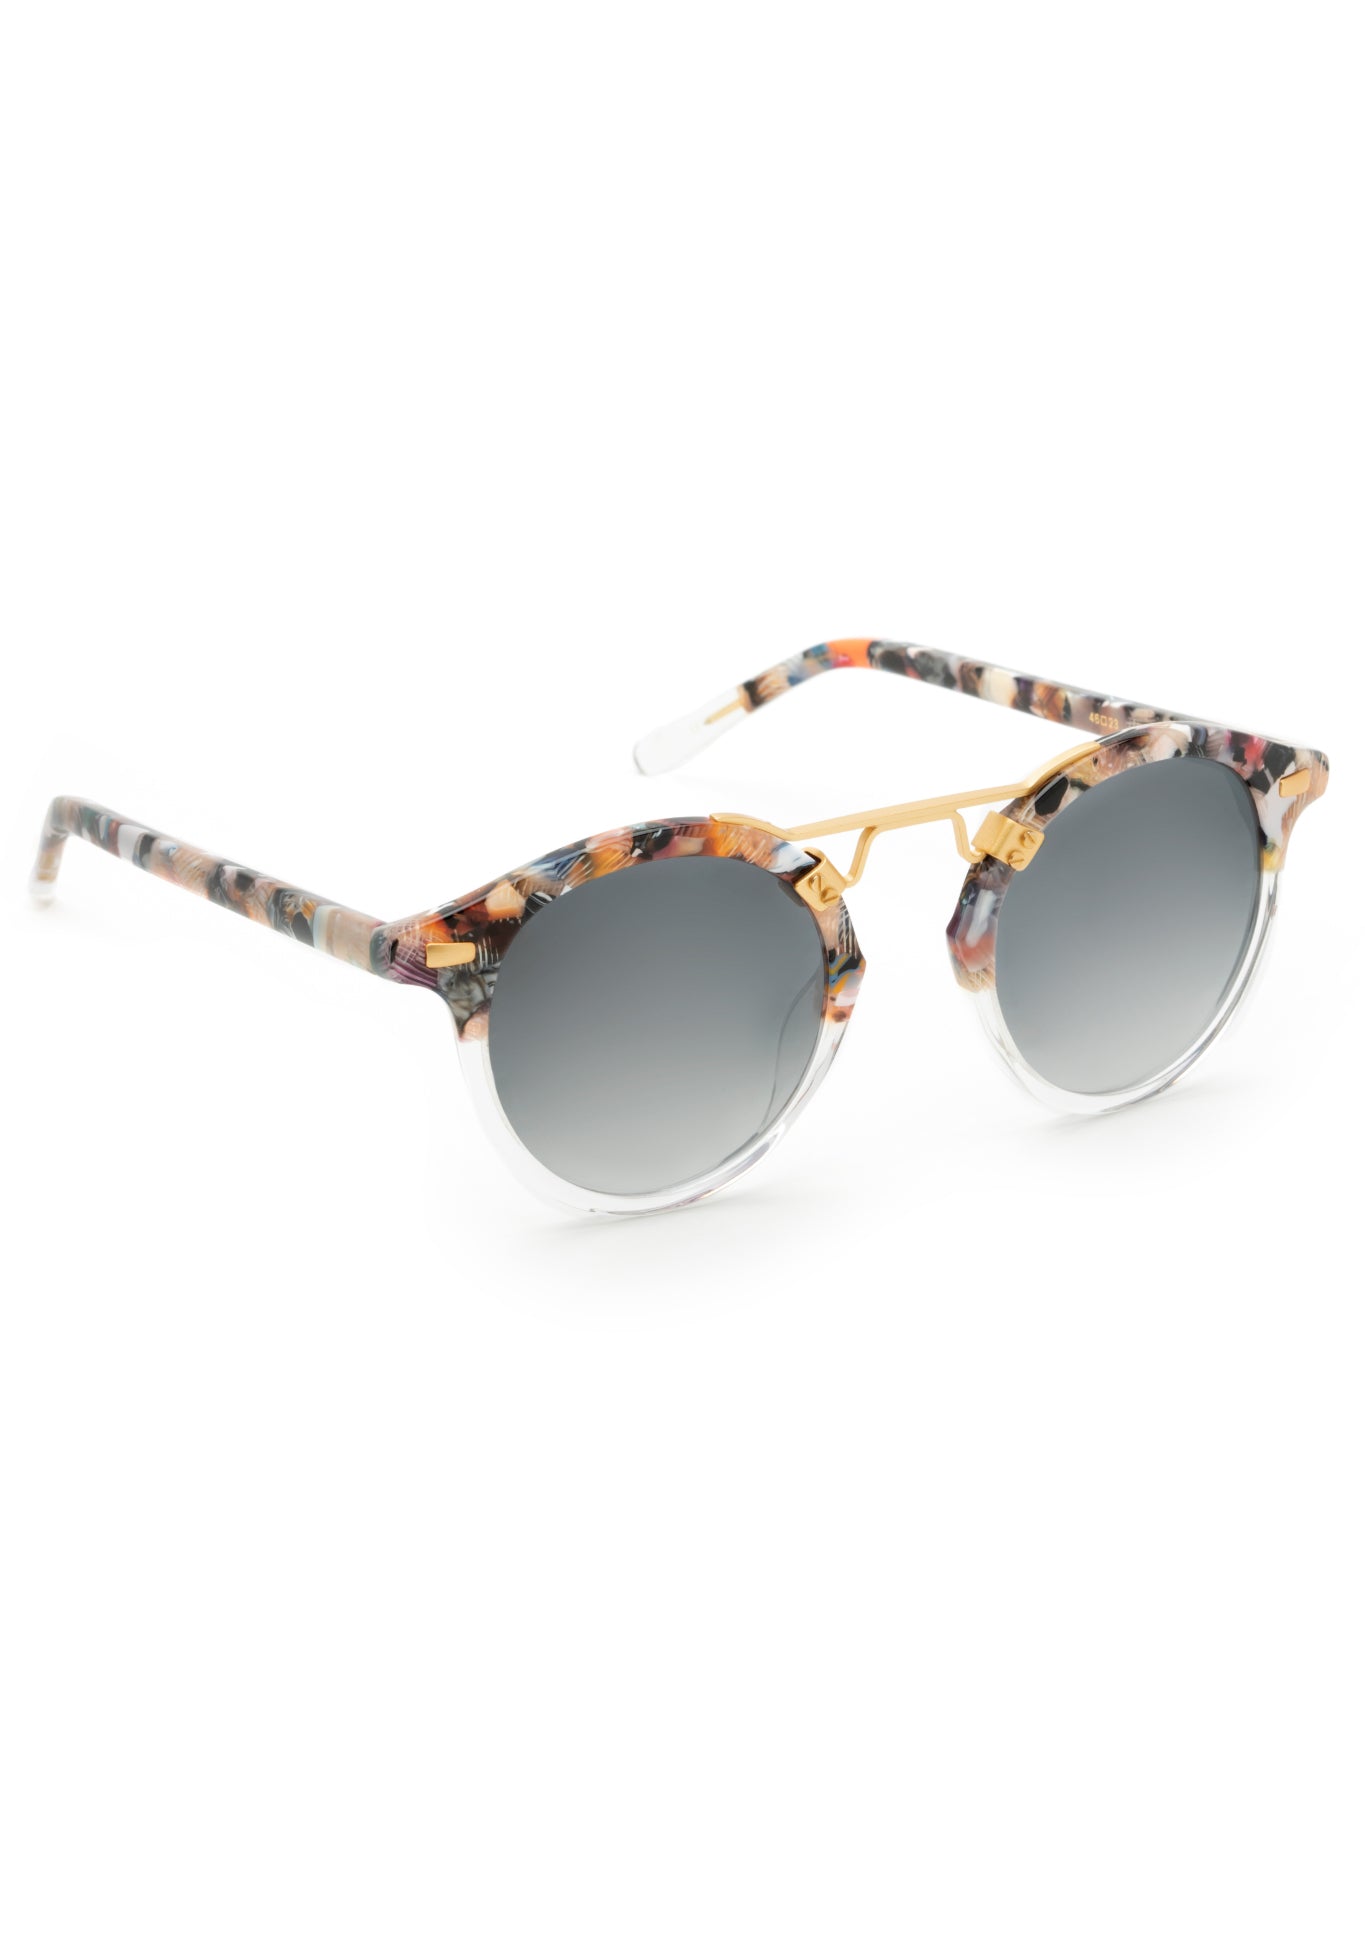 ST. LOUIS MIRRORED| Capri to Crystal 24K Handcrafted, luxury colorful acetate KREWE sunglasses